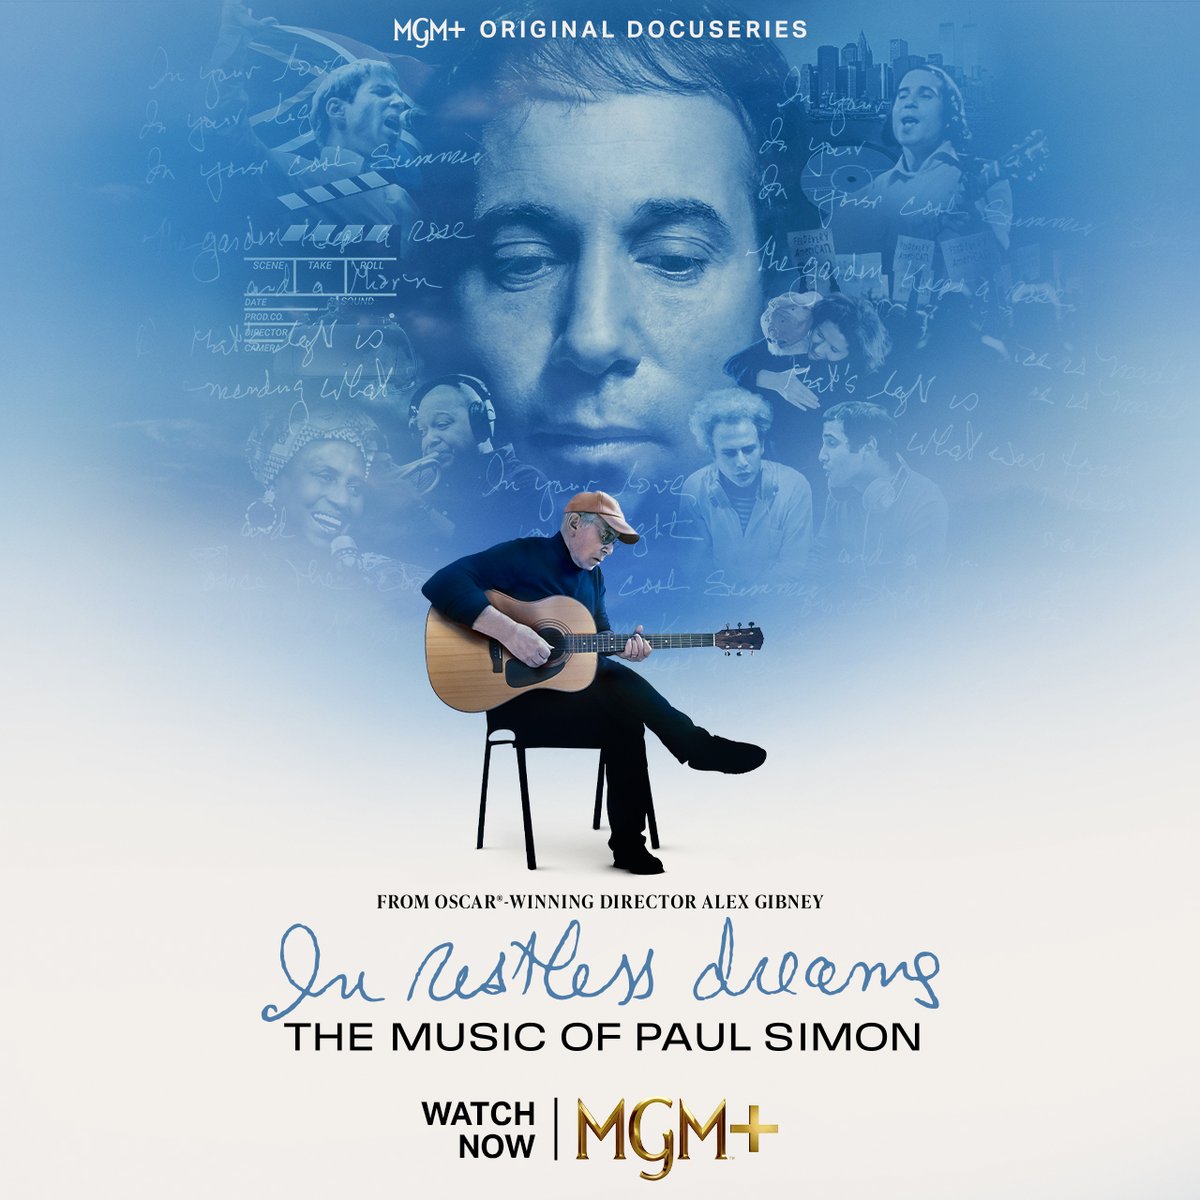 Don’t miss part 2 of #InRestlessDreams: The Music of Paul Simon – out now on @mgmplus.